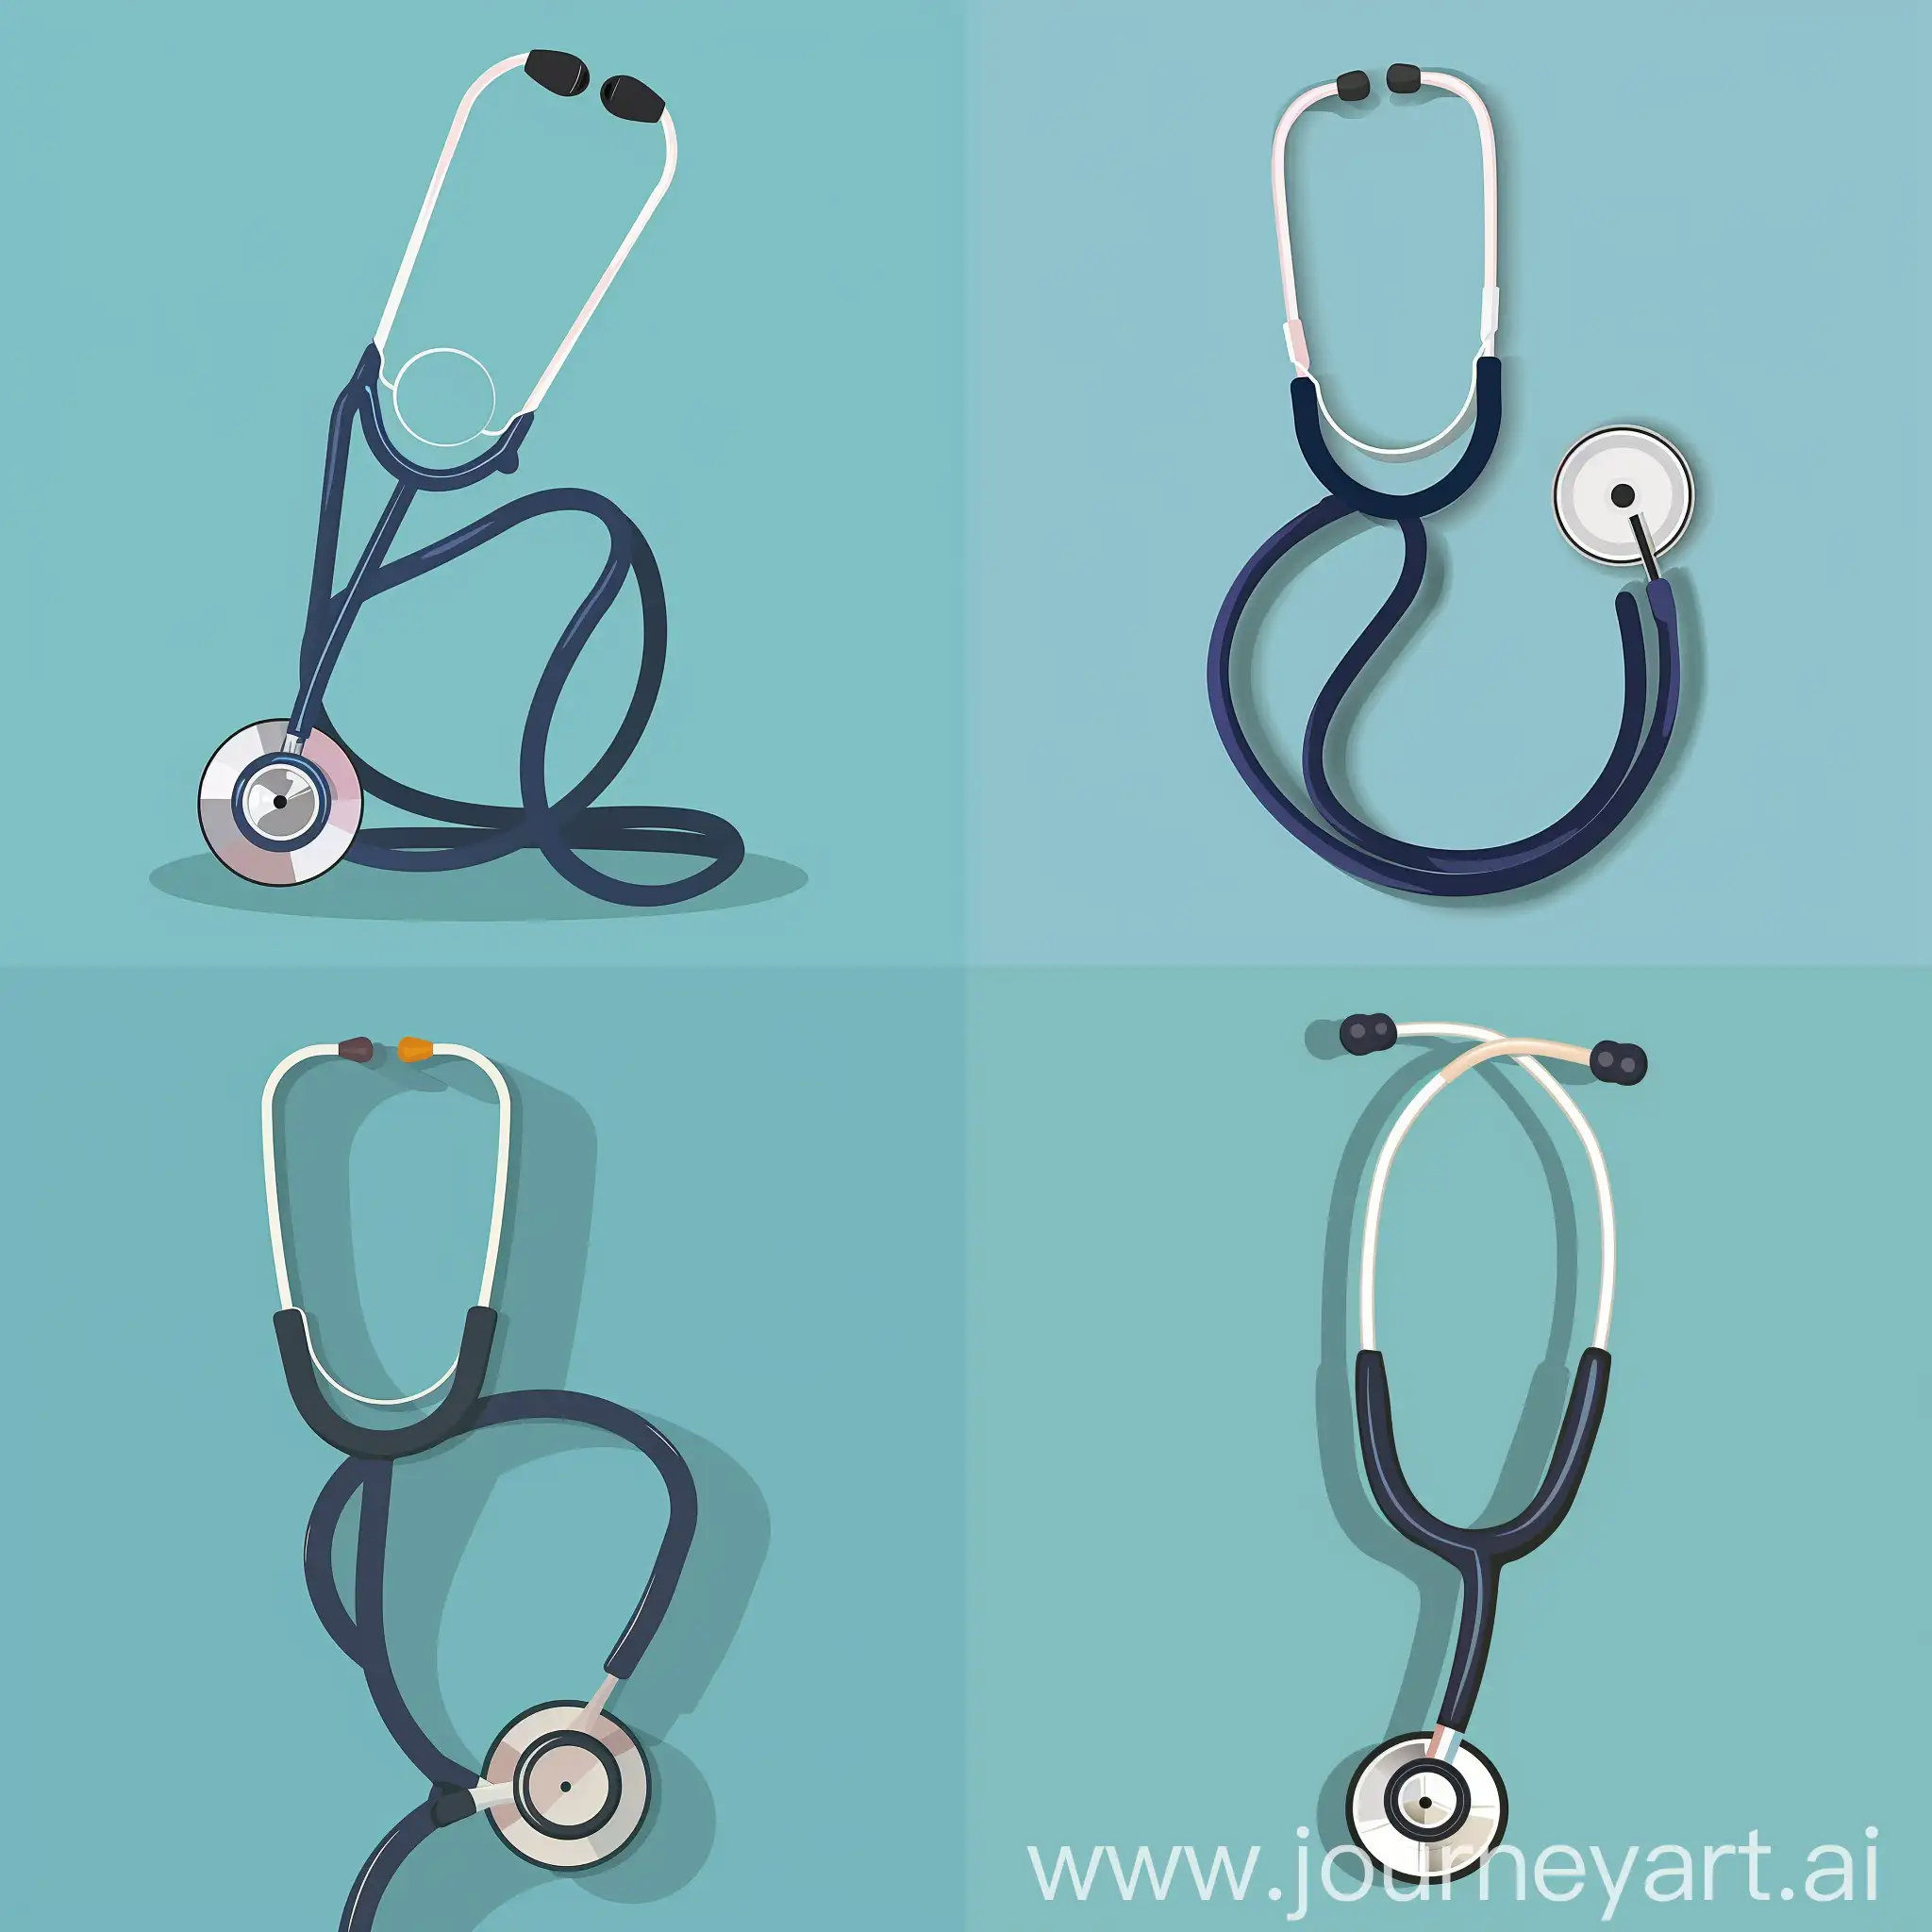 Medical-Stethoscope-Flat-Illustration-Essential-Tool-for-Healthcare-Professionals